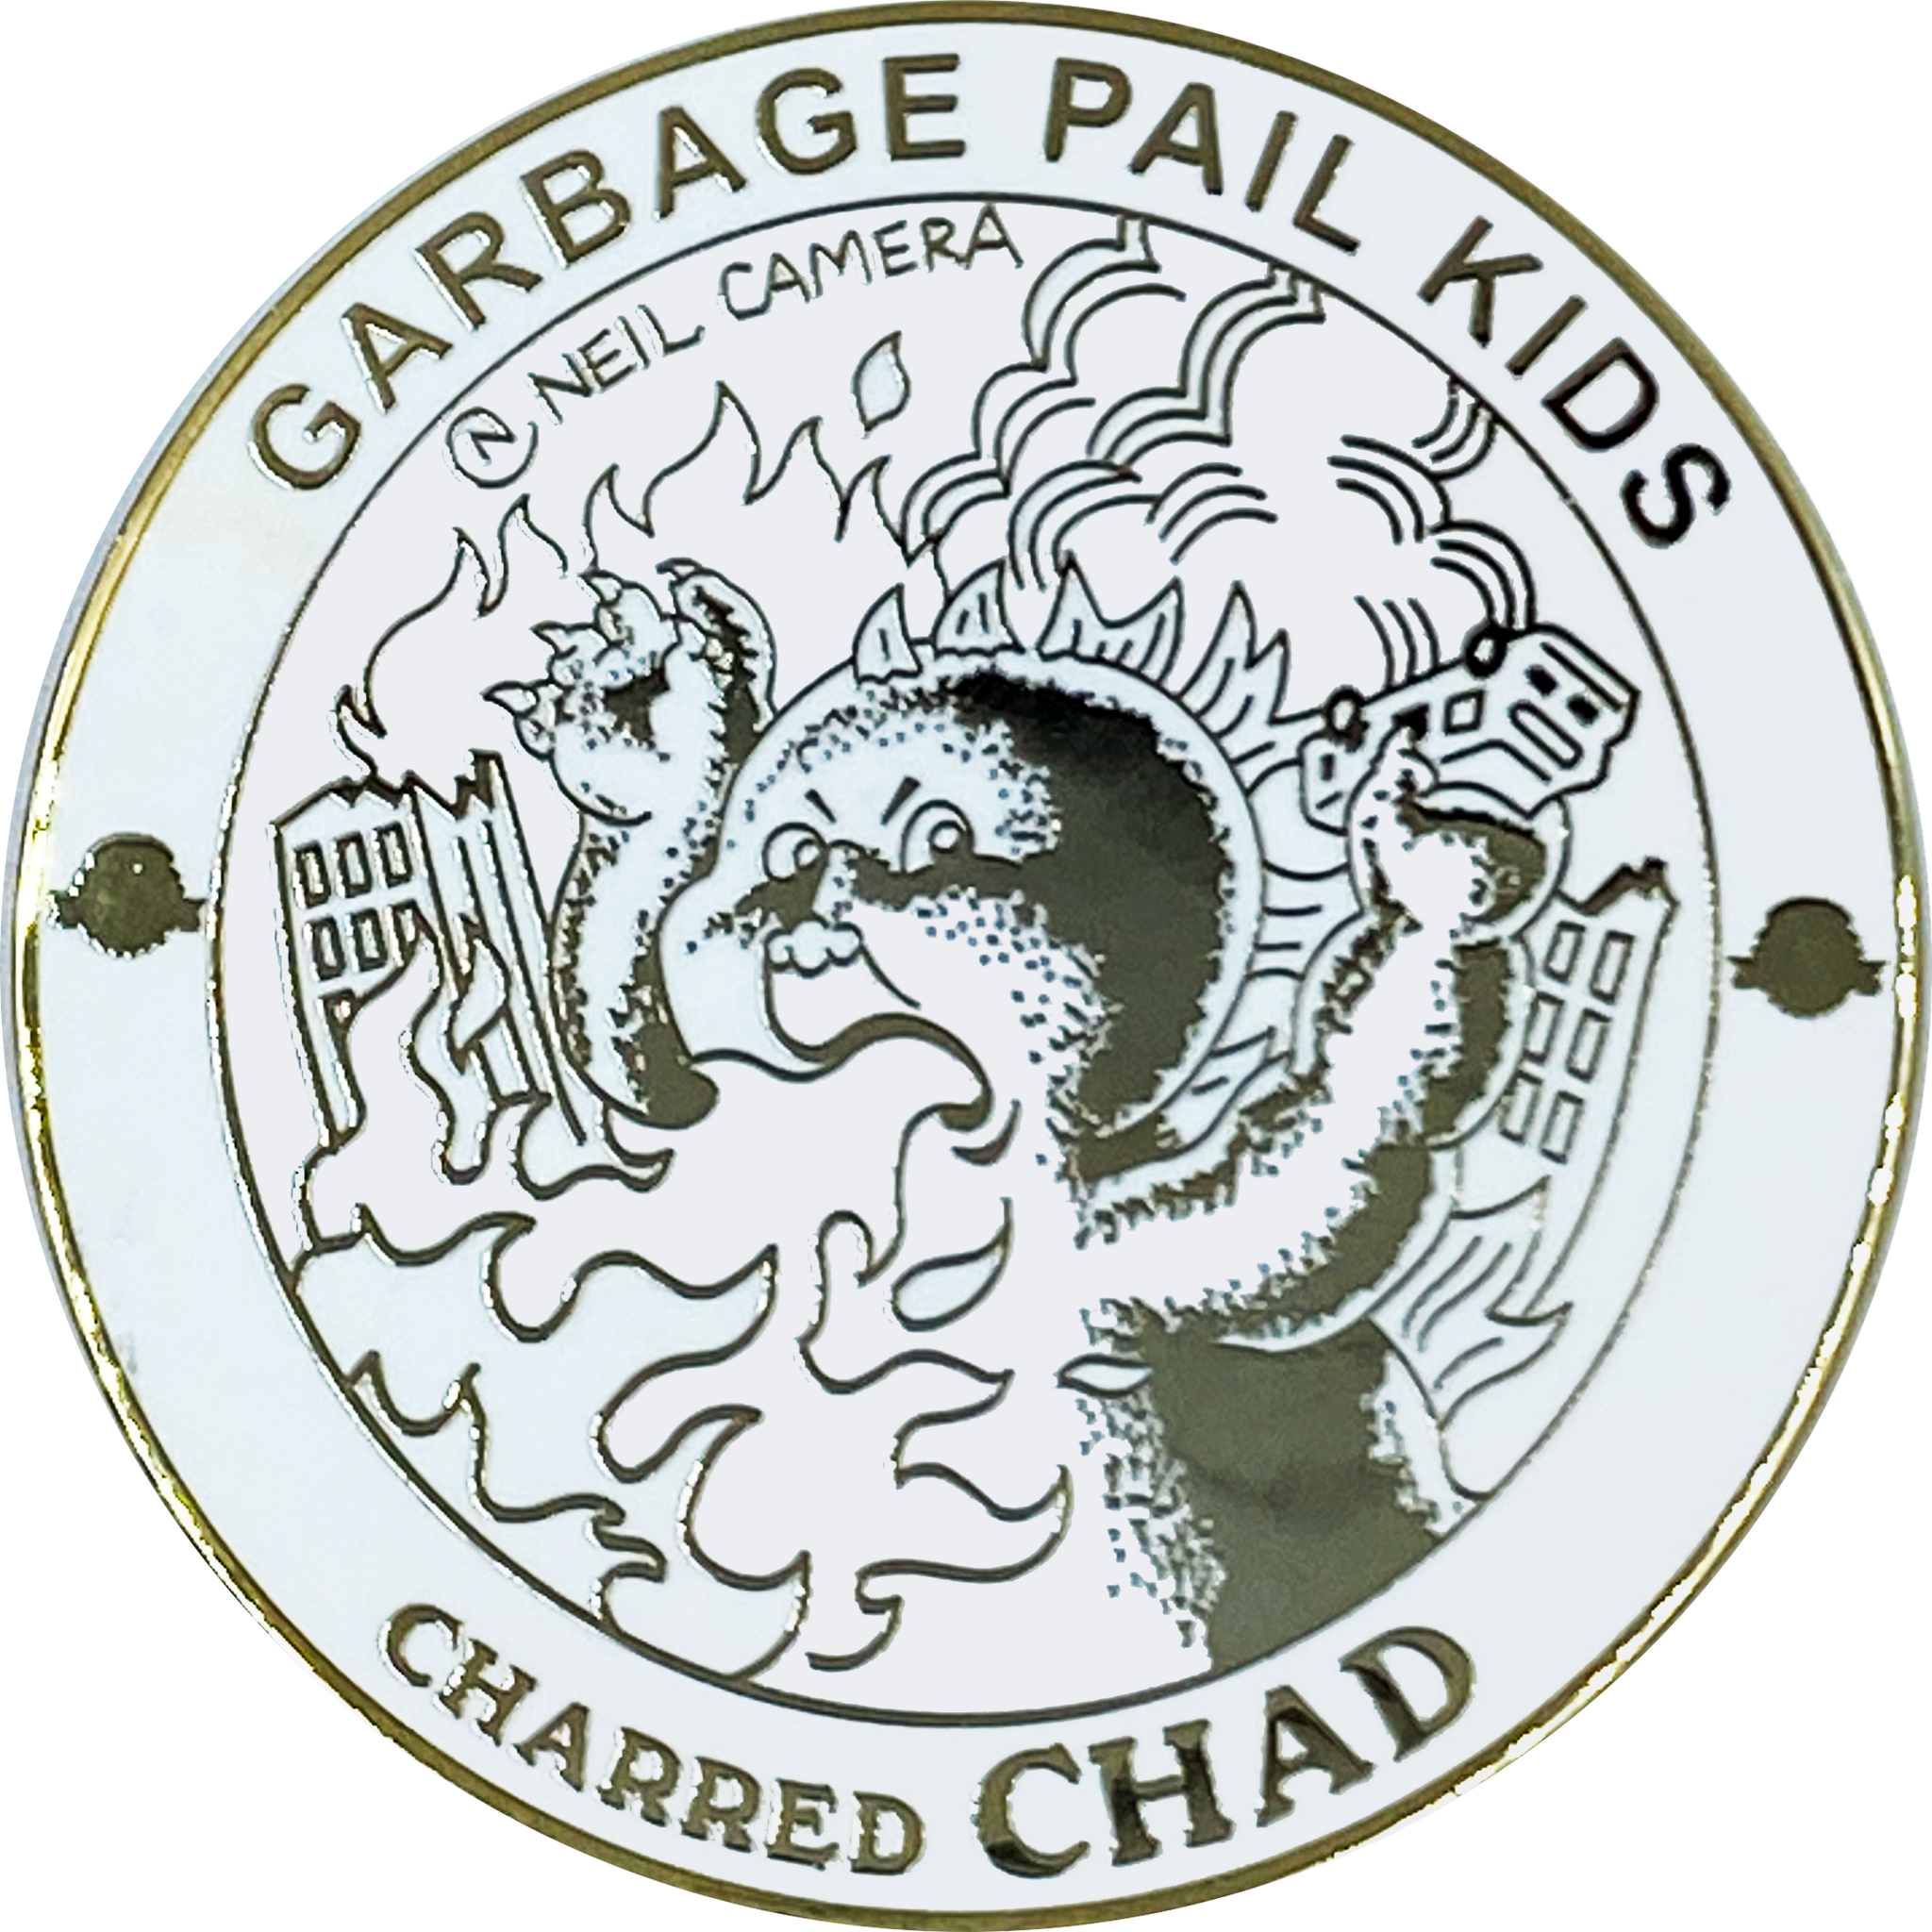 GPK-AA-005 CHARRED CHAD Topps Officially Licensed Neil Camera Artist Collaboration GPK Challenge Coin Garbage Pail Kids